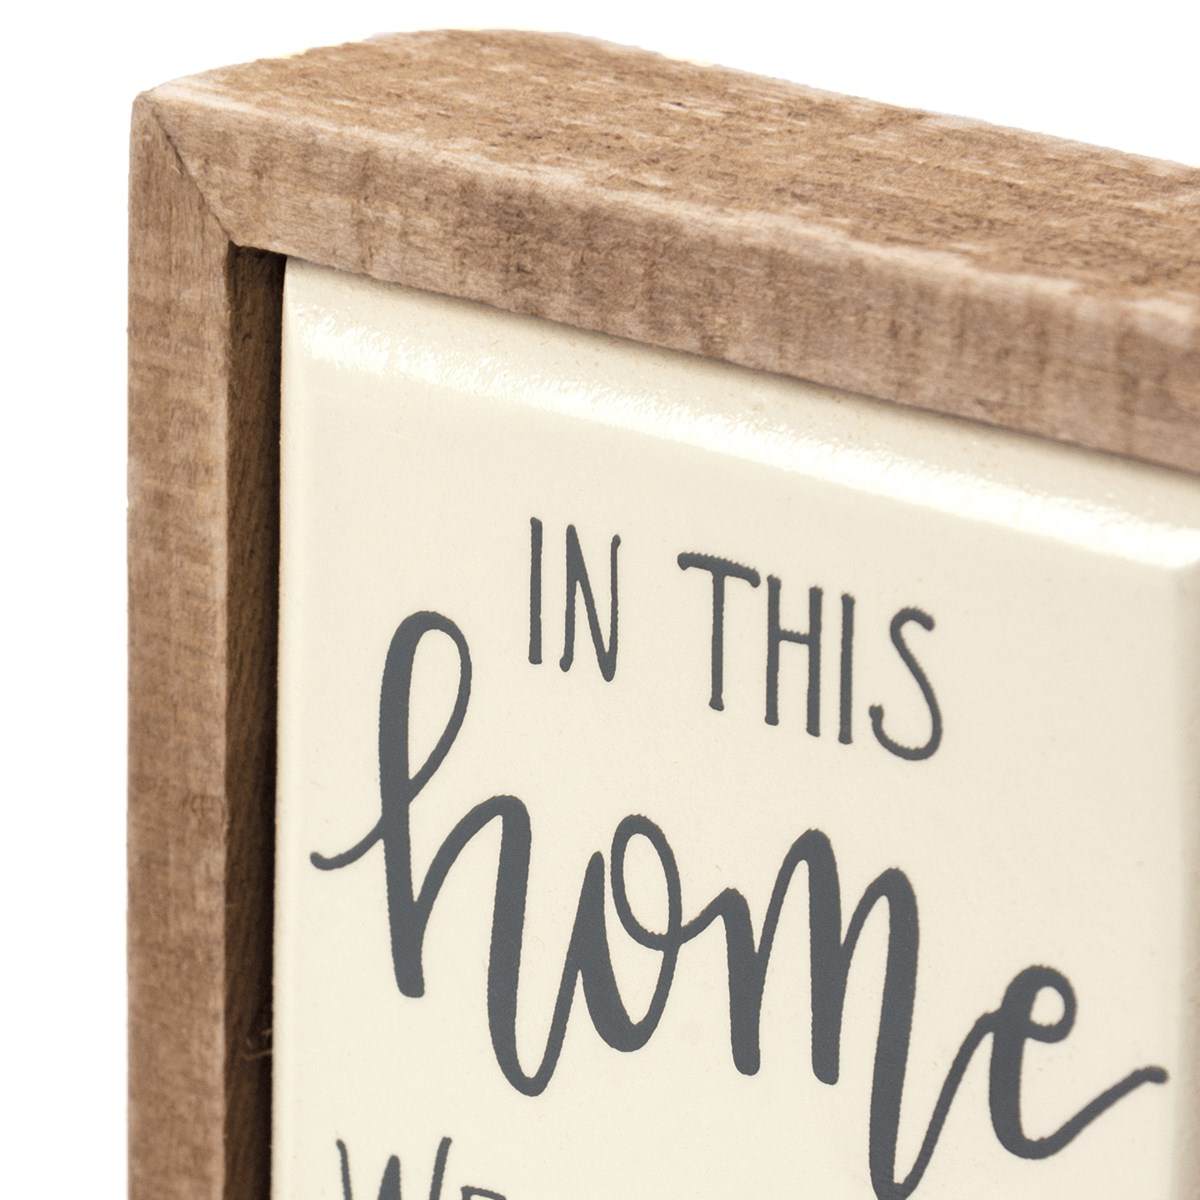 Narrate The Cat's Thoughts Box Sign Mini - Wood